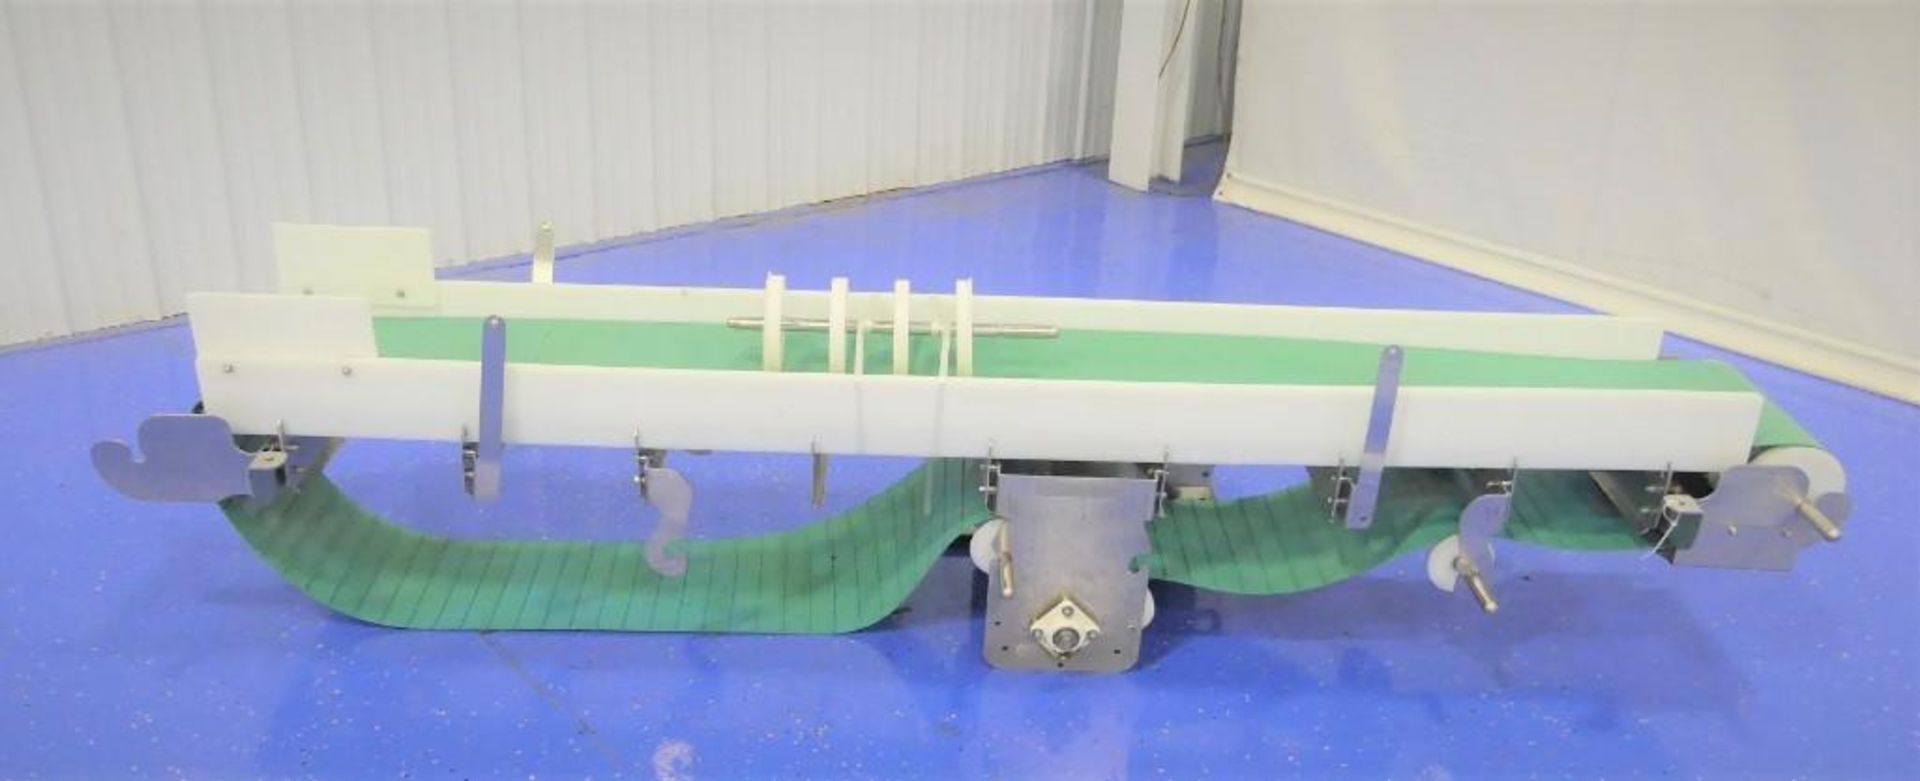 Smooth Rubber Blue Belt Conveyor 10 Foot Long x 14 Inch Wide - Image 2 of 7